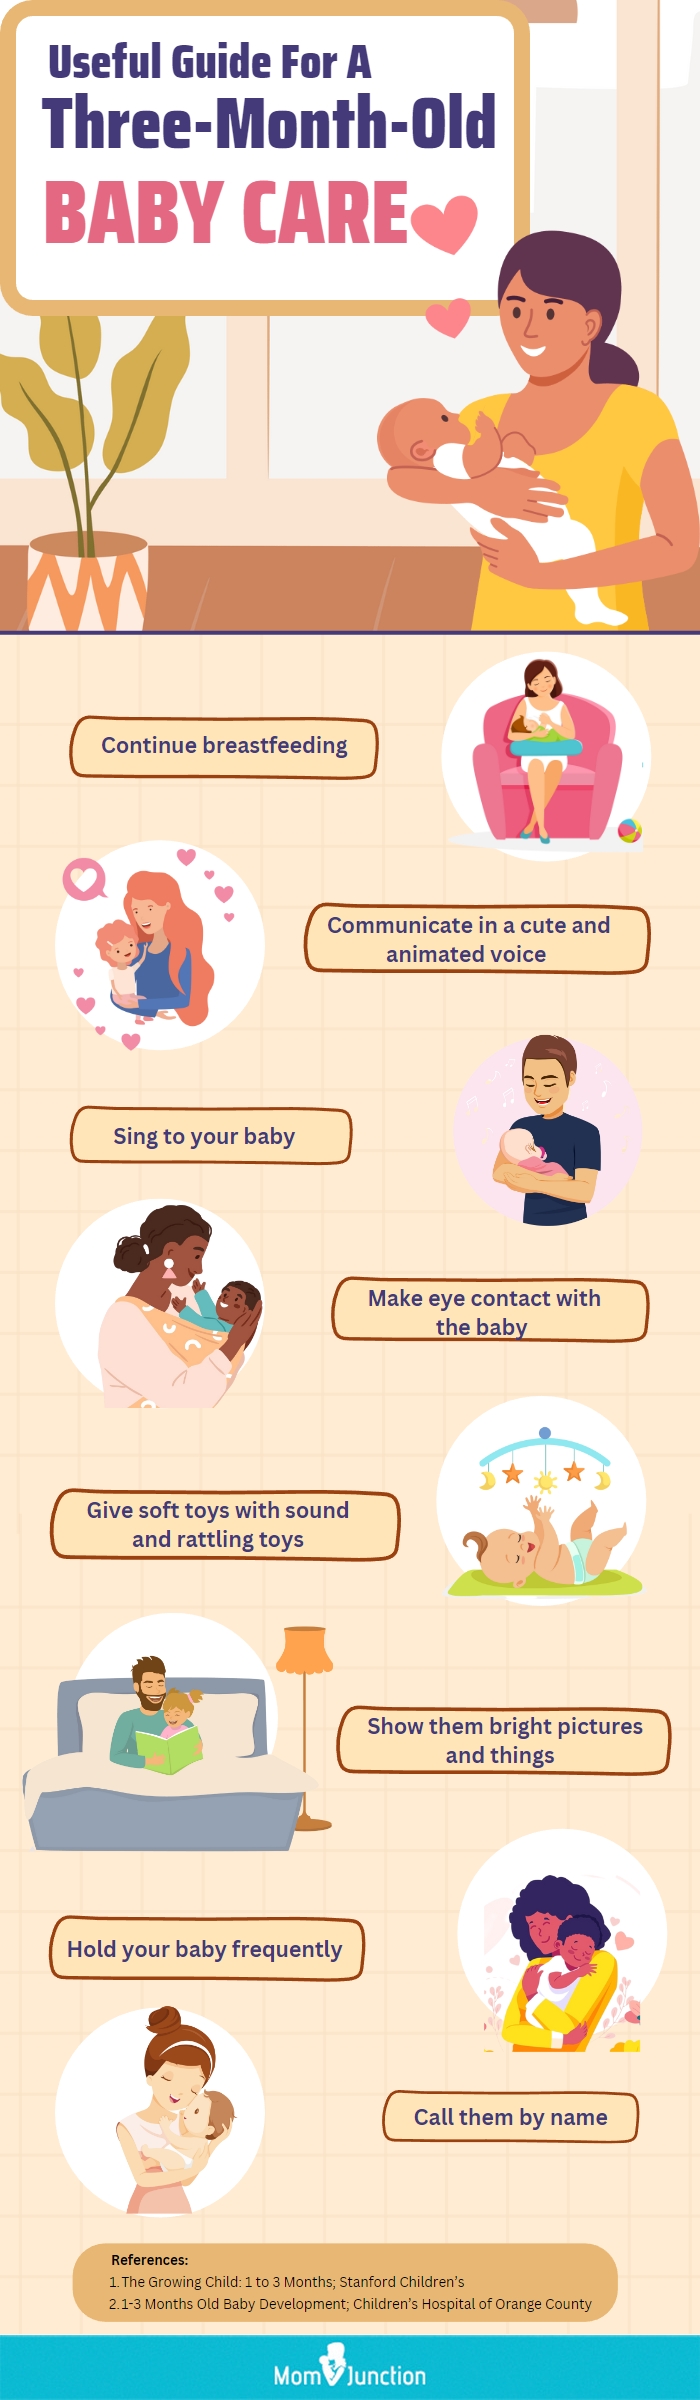 useful guide for a three month old baby (infographic)